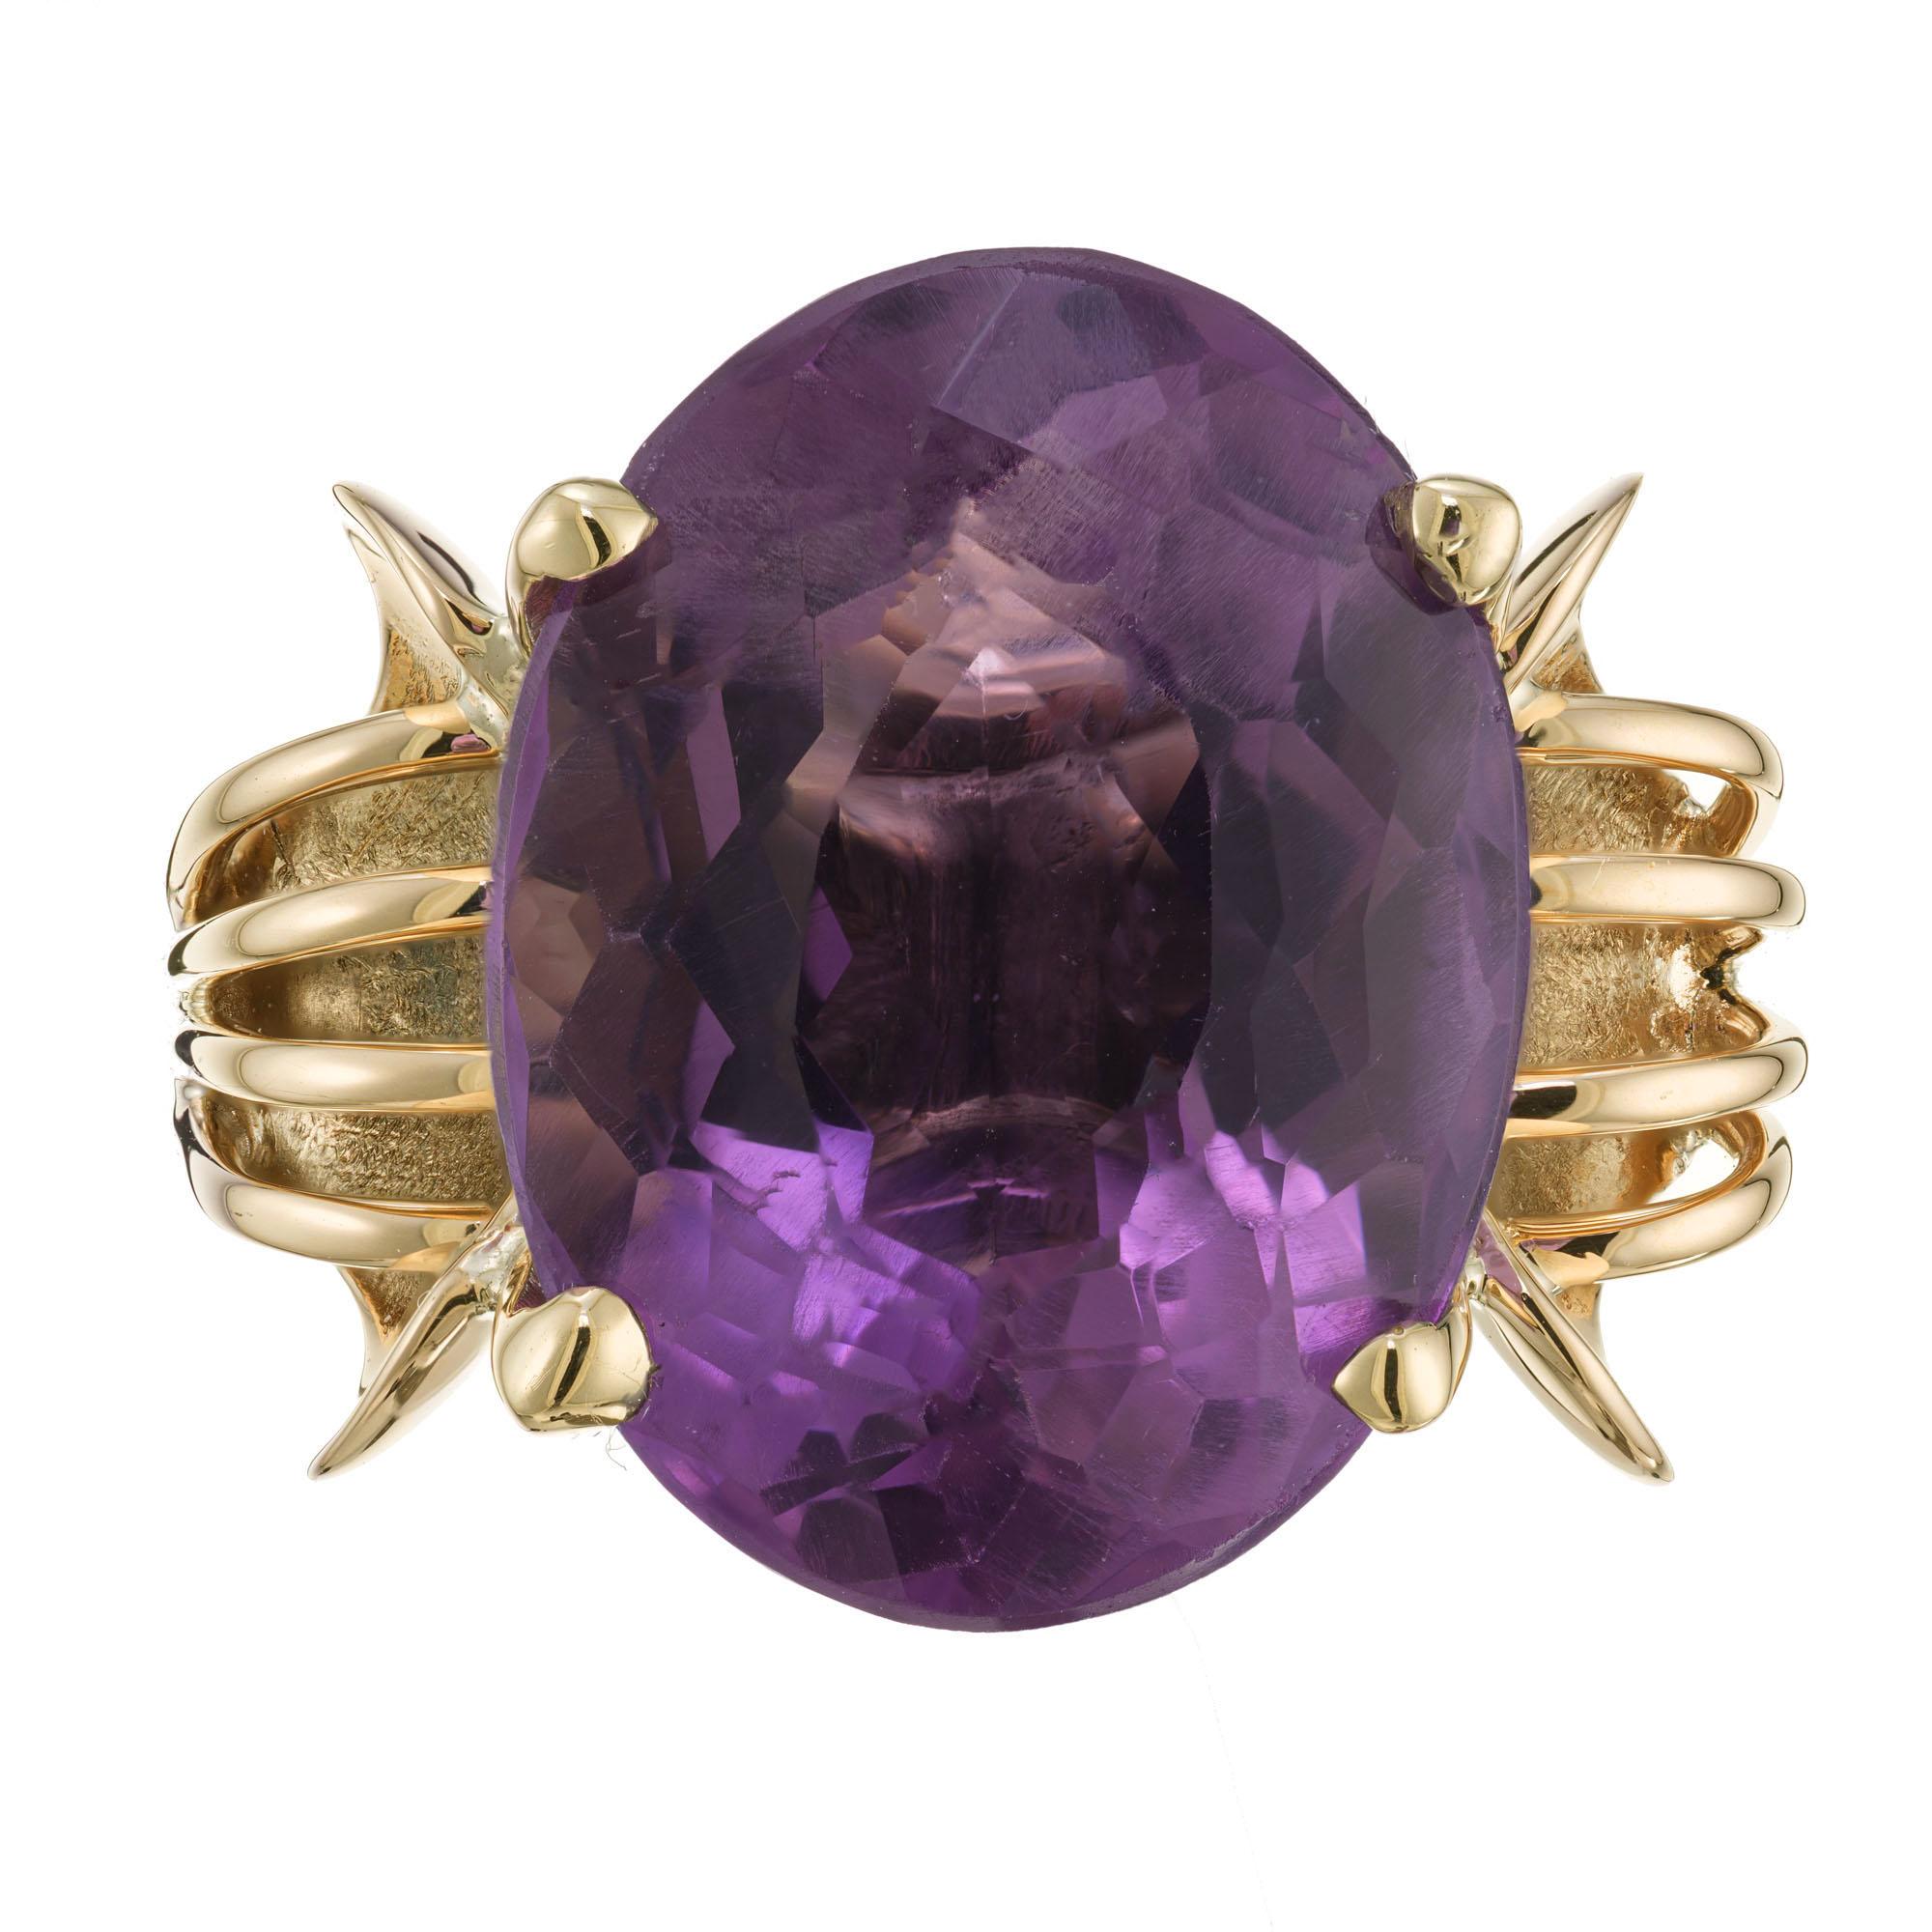 1940's amethyst cocktail ring. 12.50ct oval amethyst center stone, set in a hand made 14k yellow gold setting. 

1 natural bright medium 17.8 x 13.5mm purple Amethyst, approx. total weight 12.50cts
Size 7 and sizable
14k Yellow Gold
10.6 grams
Width